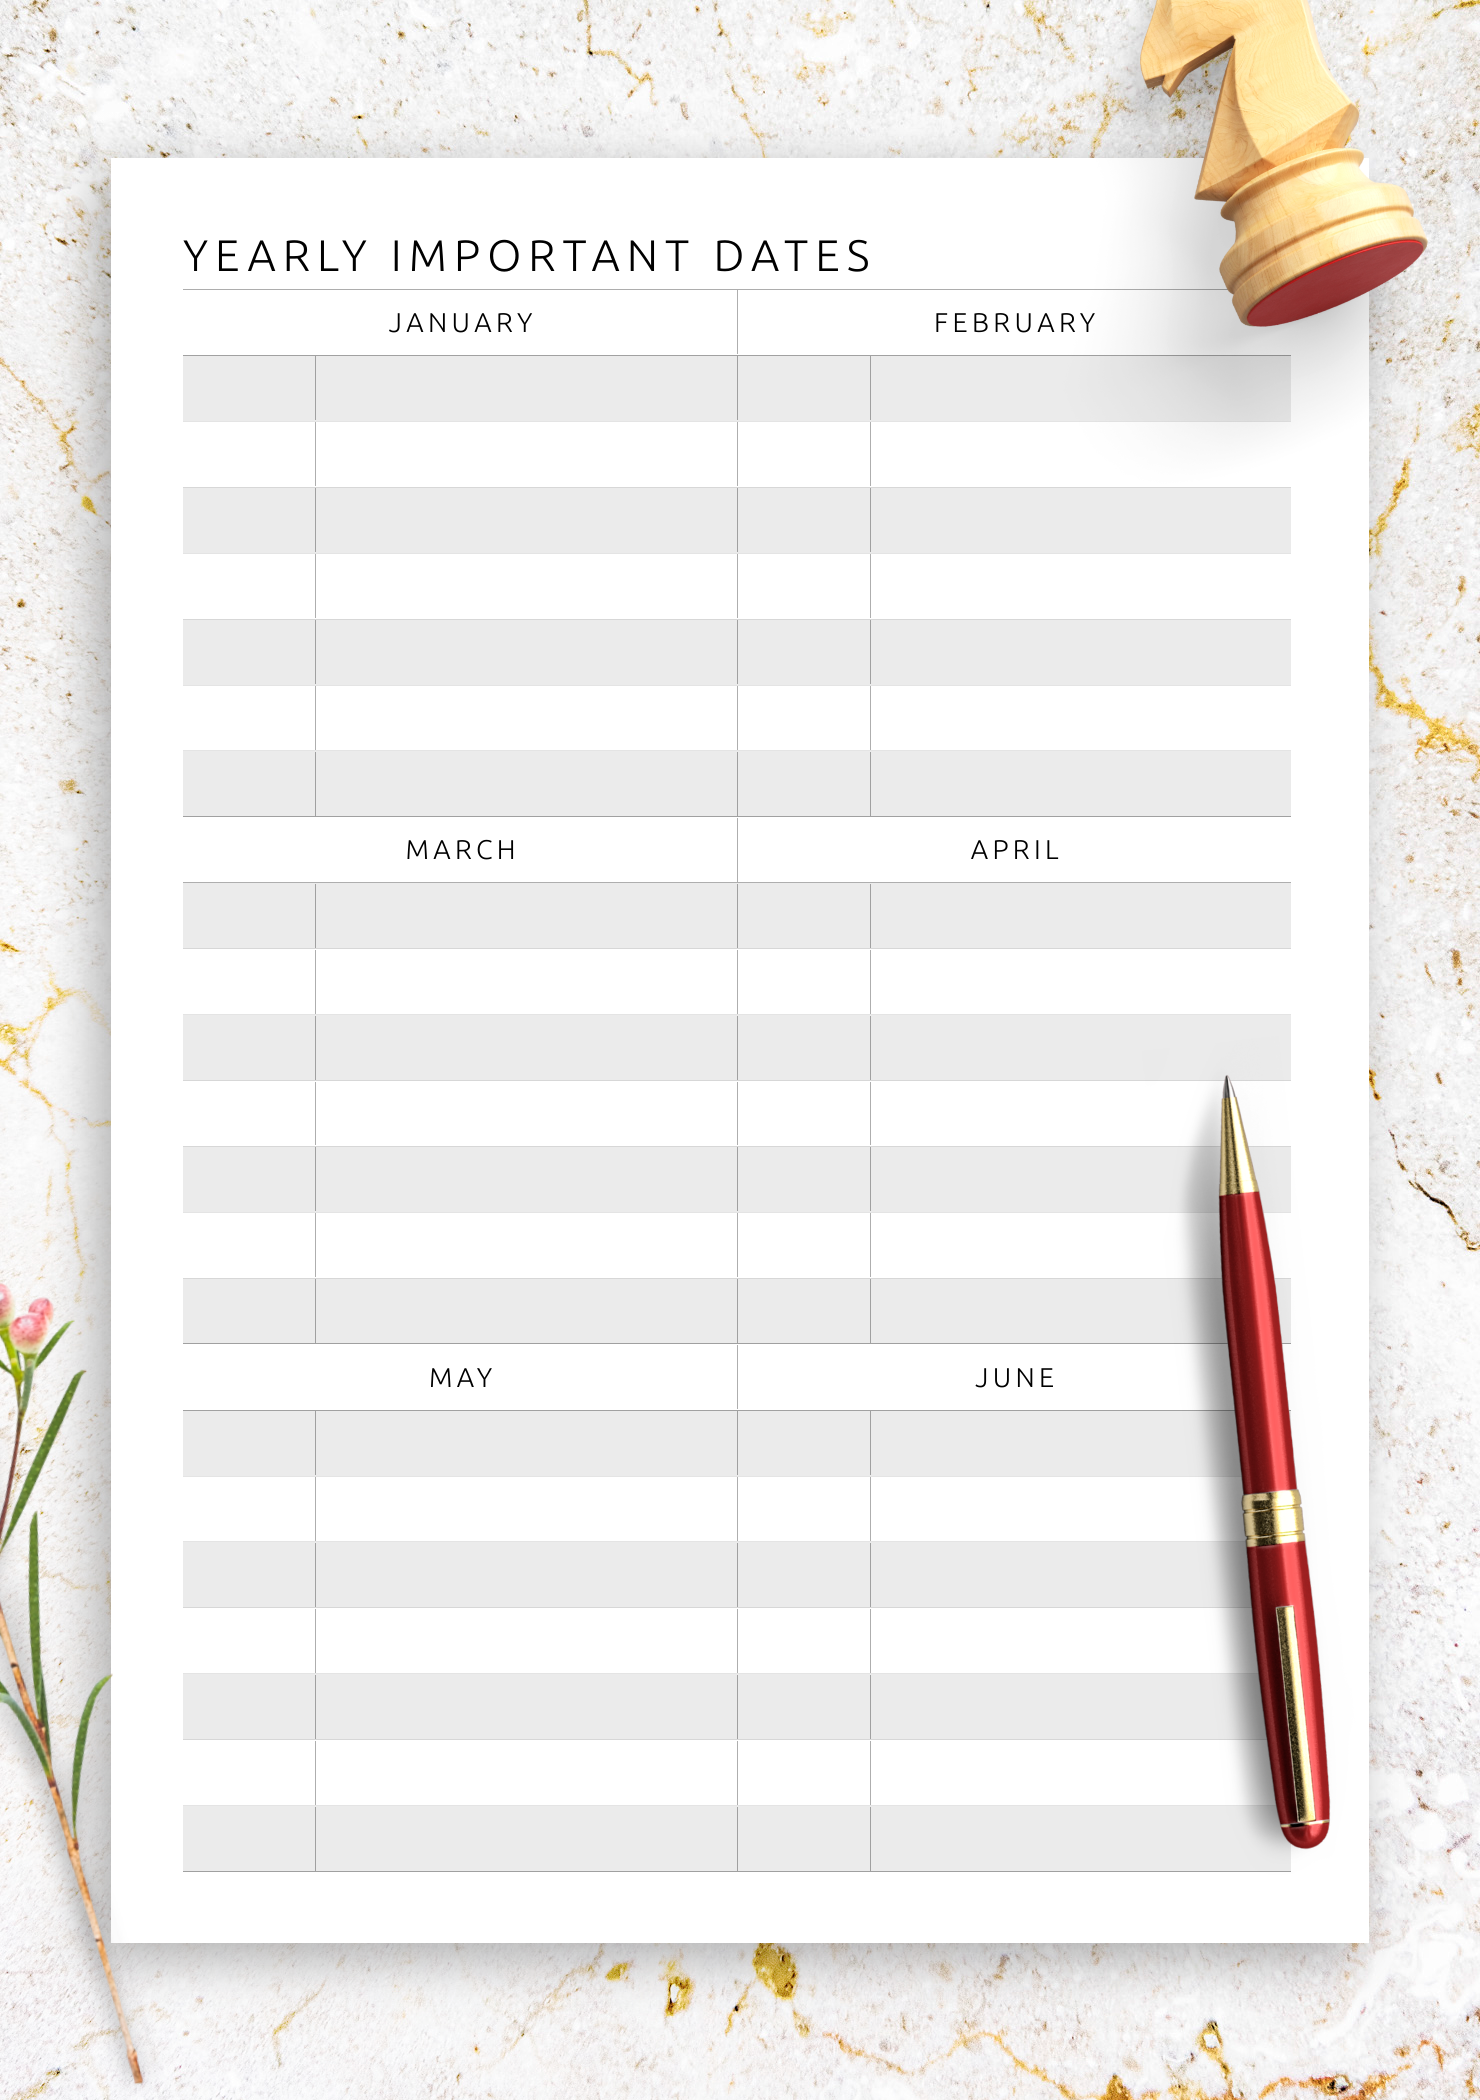 download-printable-yearly-important-dates-template-pdf